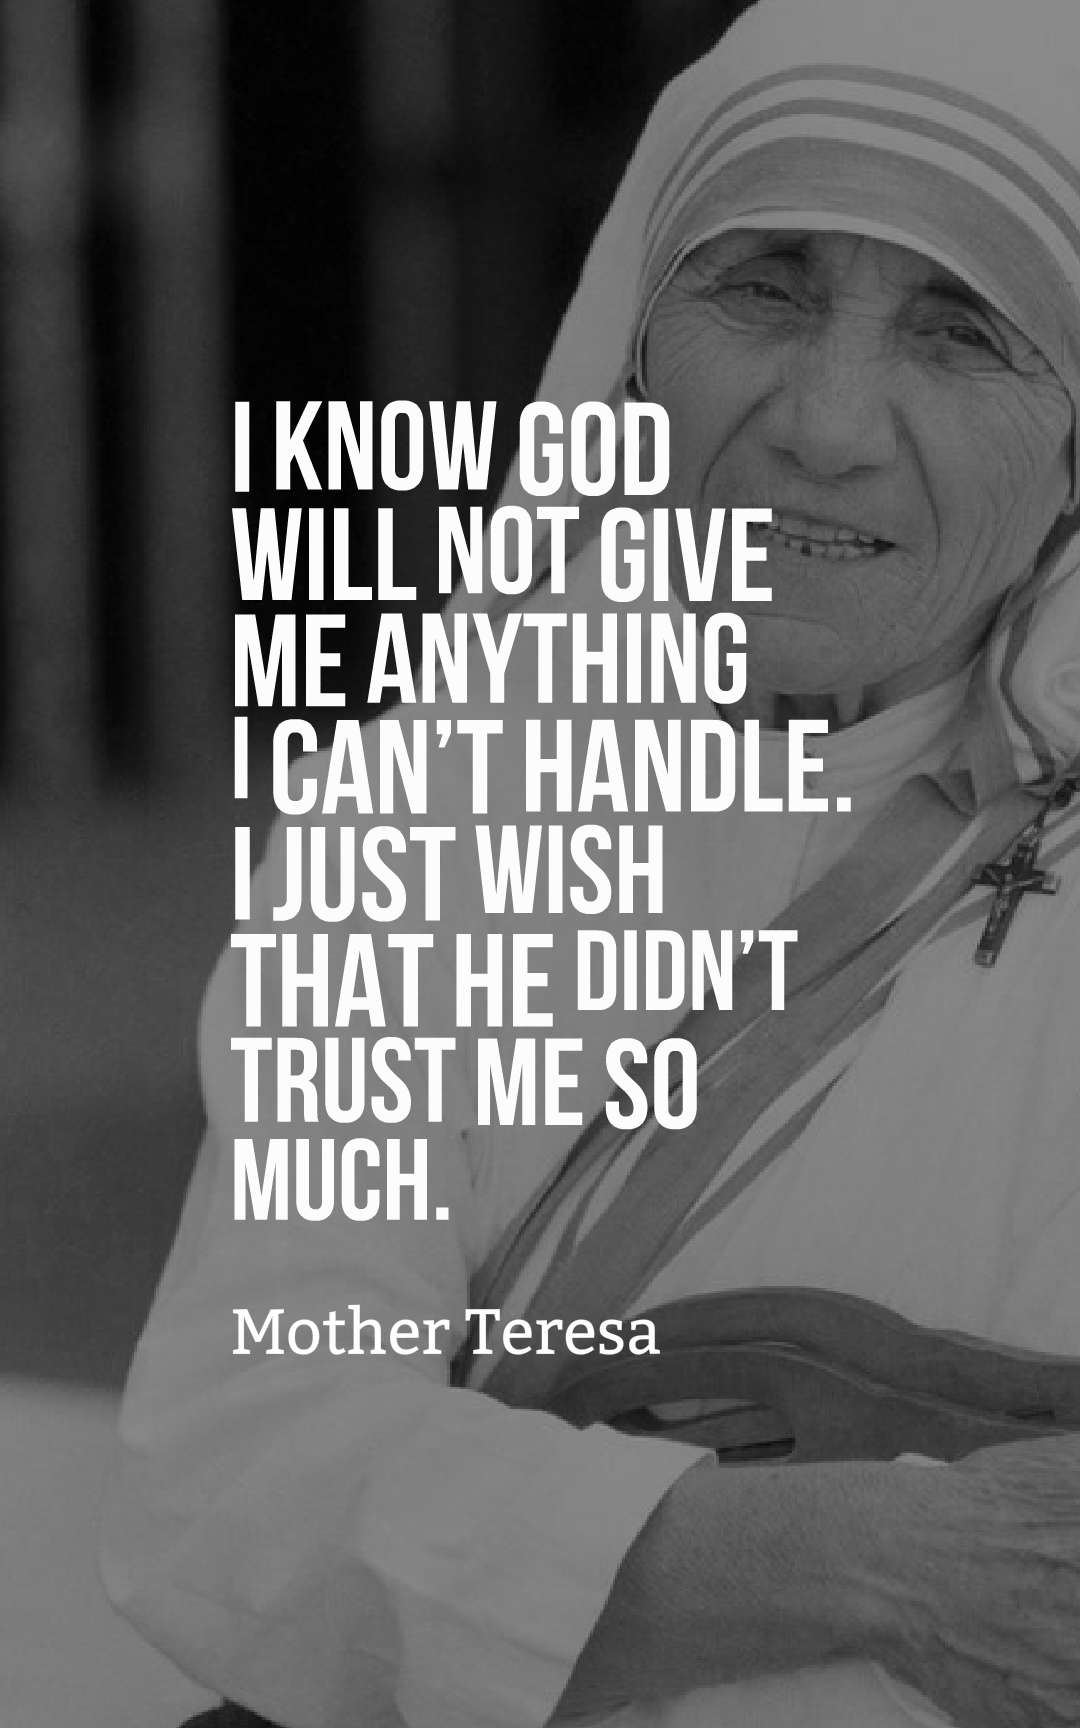 I know God will not give me anything I can’t handle. I just wish that He didn’t trust me so much.